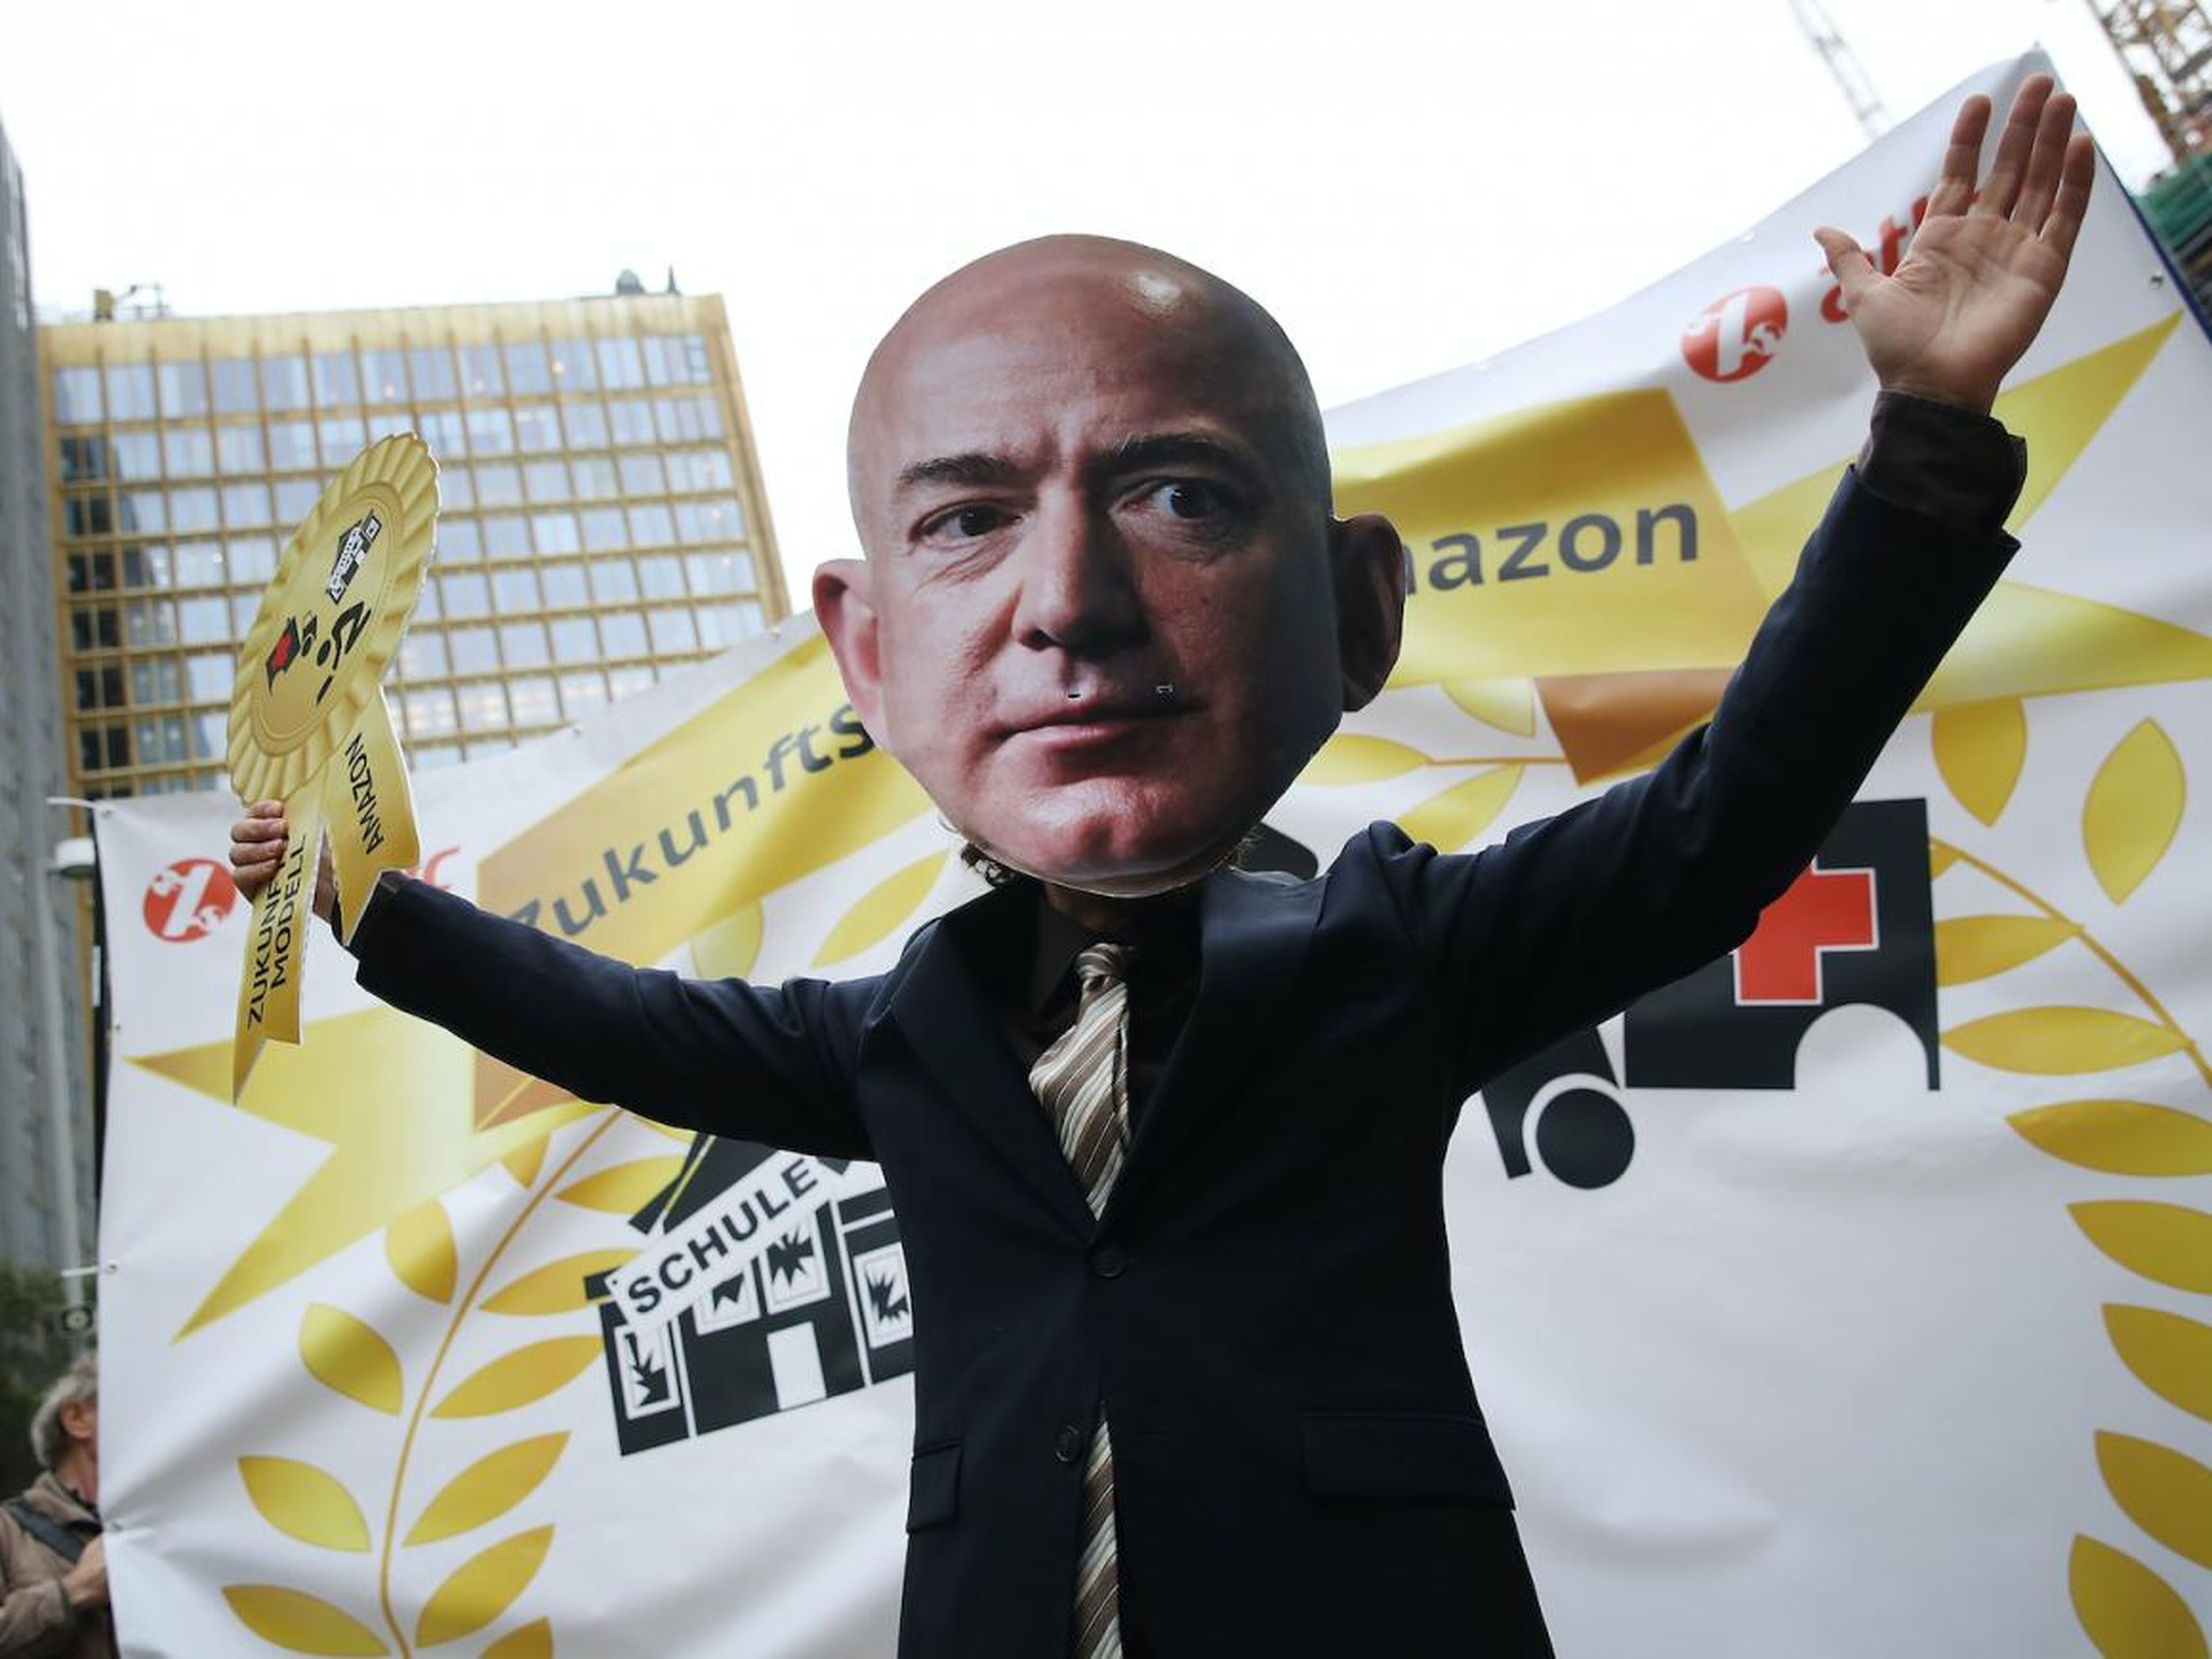 Amazon workers across Europe will protest today.